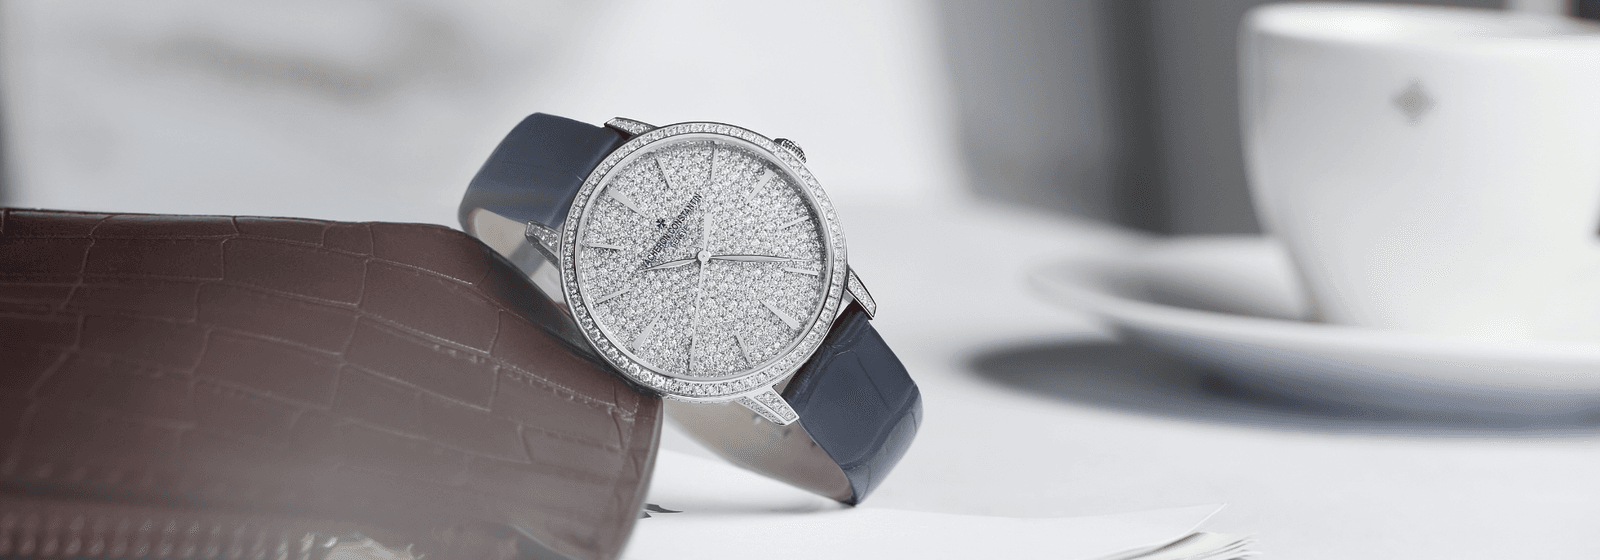 Vacheron Constantin Introduces A Jewellery Model In Its Patrimony Collection